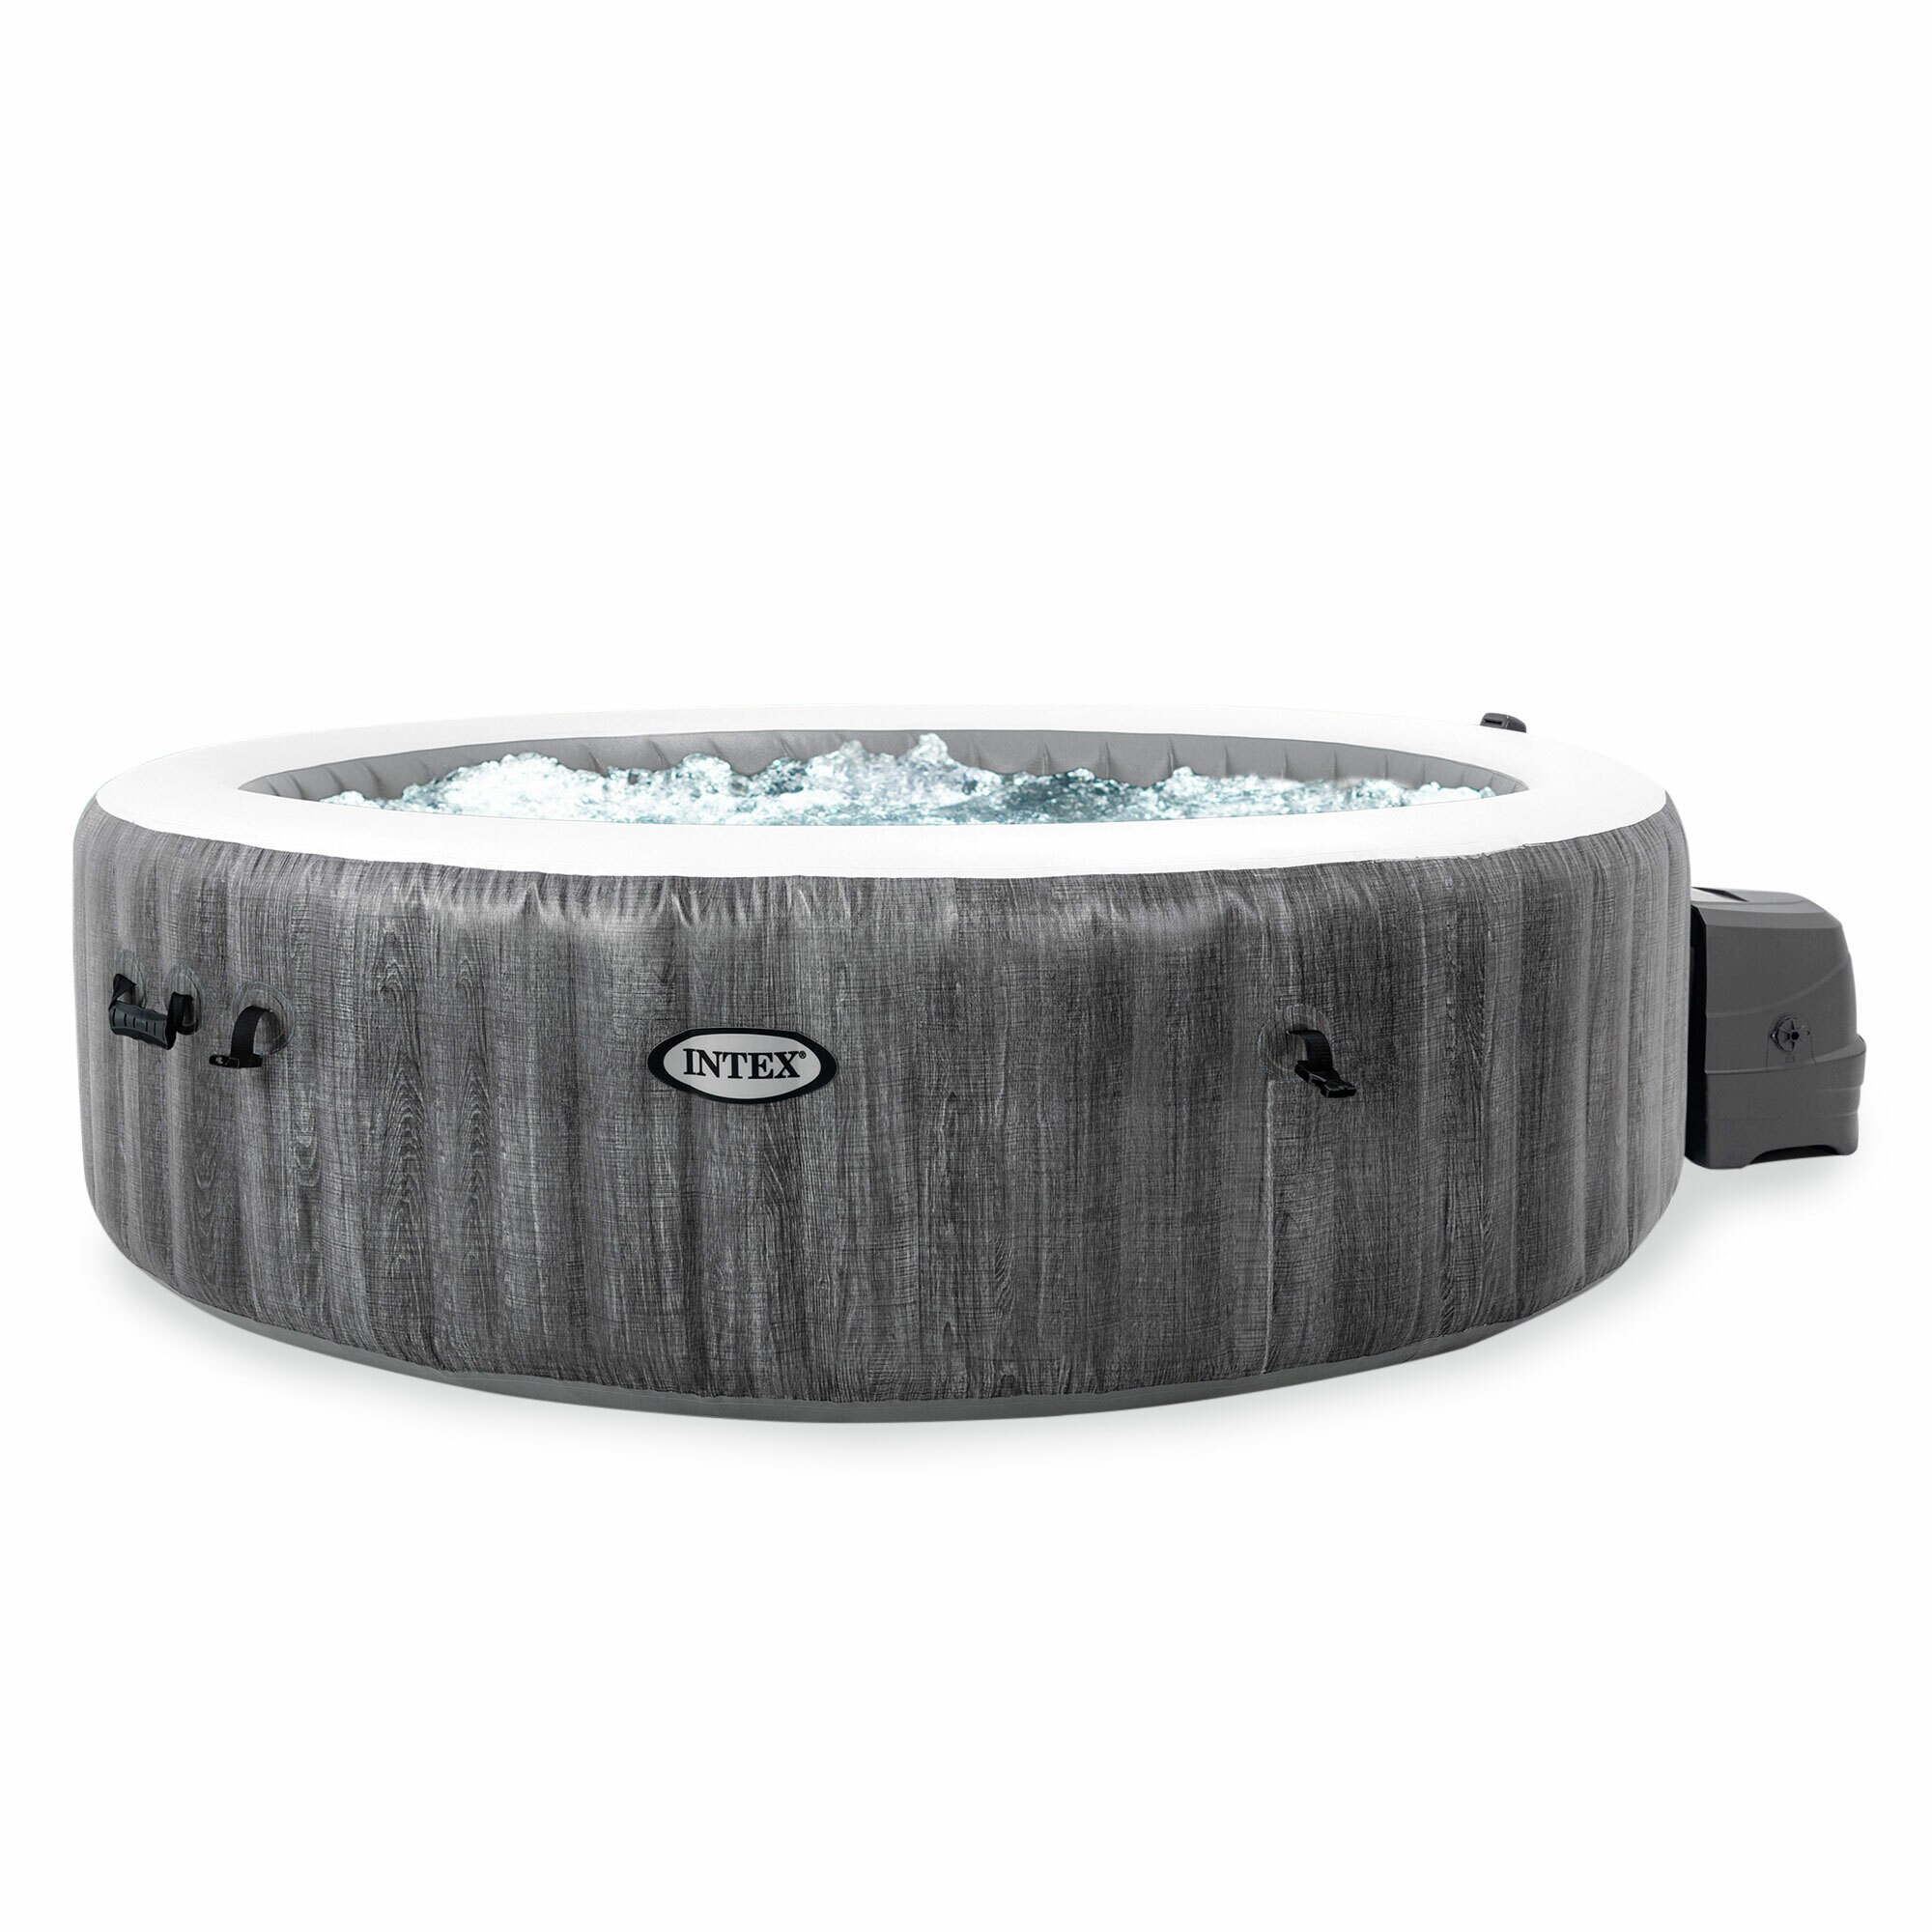 Wholesale Outdoor Inflatable Hot Tubs Portable SPA Whirpool Bathtub Air Jet  LED Lights for Adults - China SPA, Hot Tub